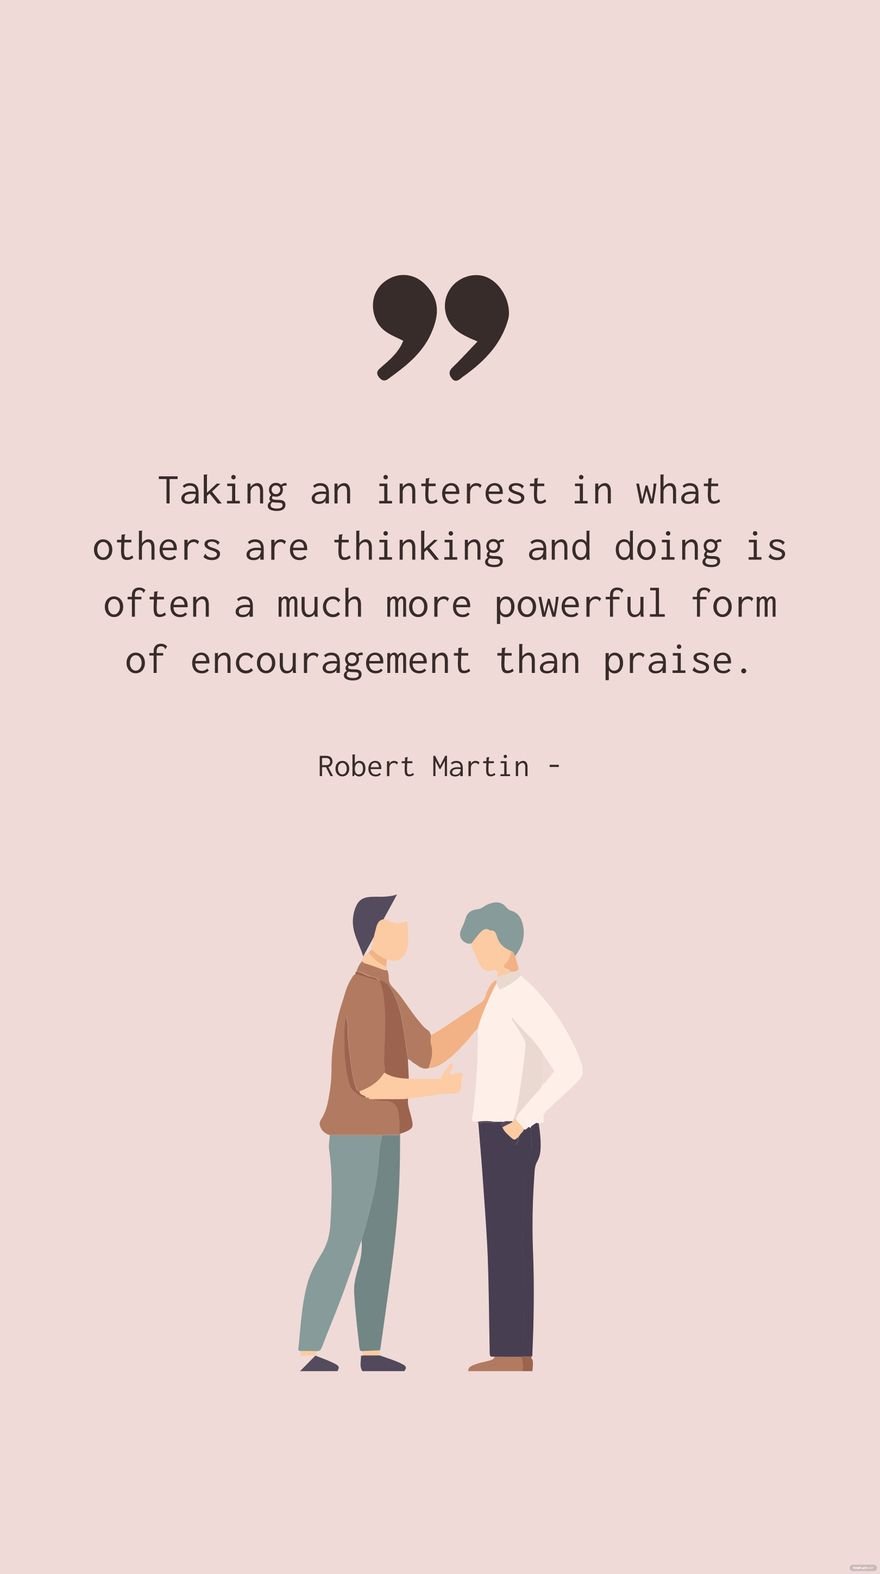 Robert Martin - Taking an interest in what others are thinking and doing is often a much more powerful form of encouragement than praise.